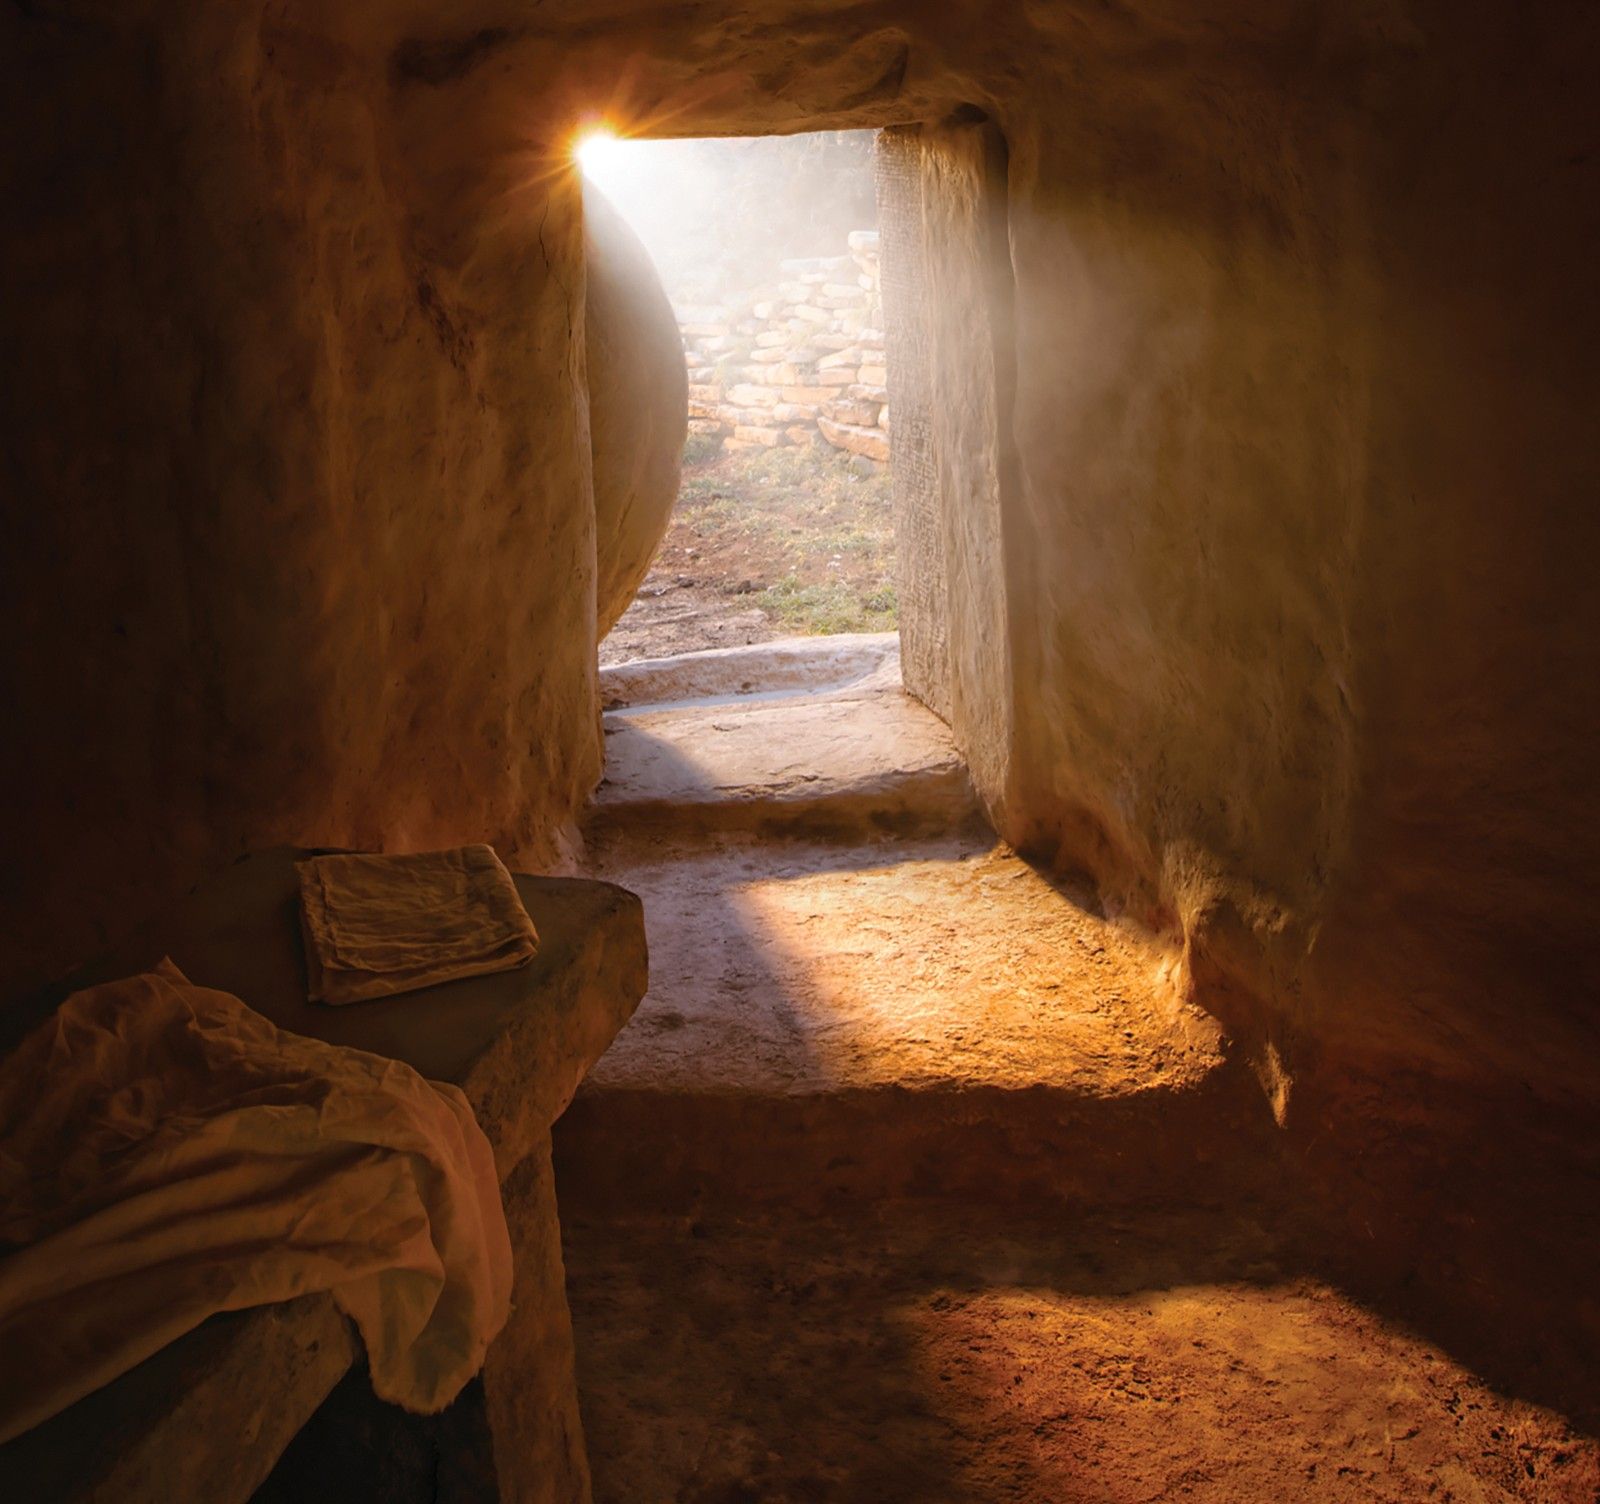 A portrayal of Christ's empty tomb after his resurrection.